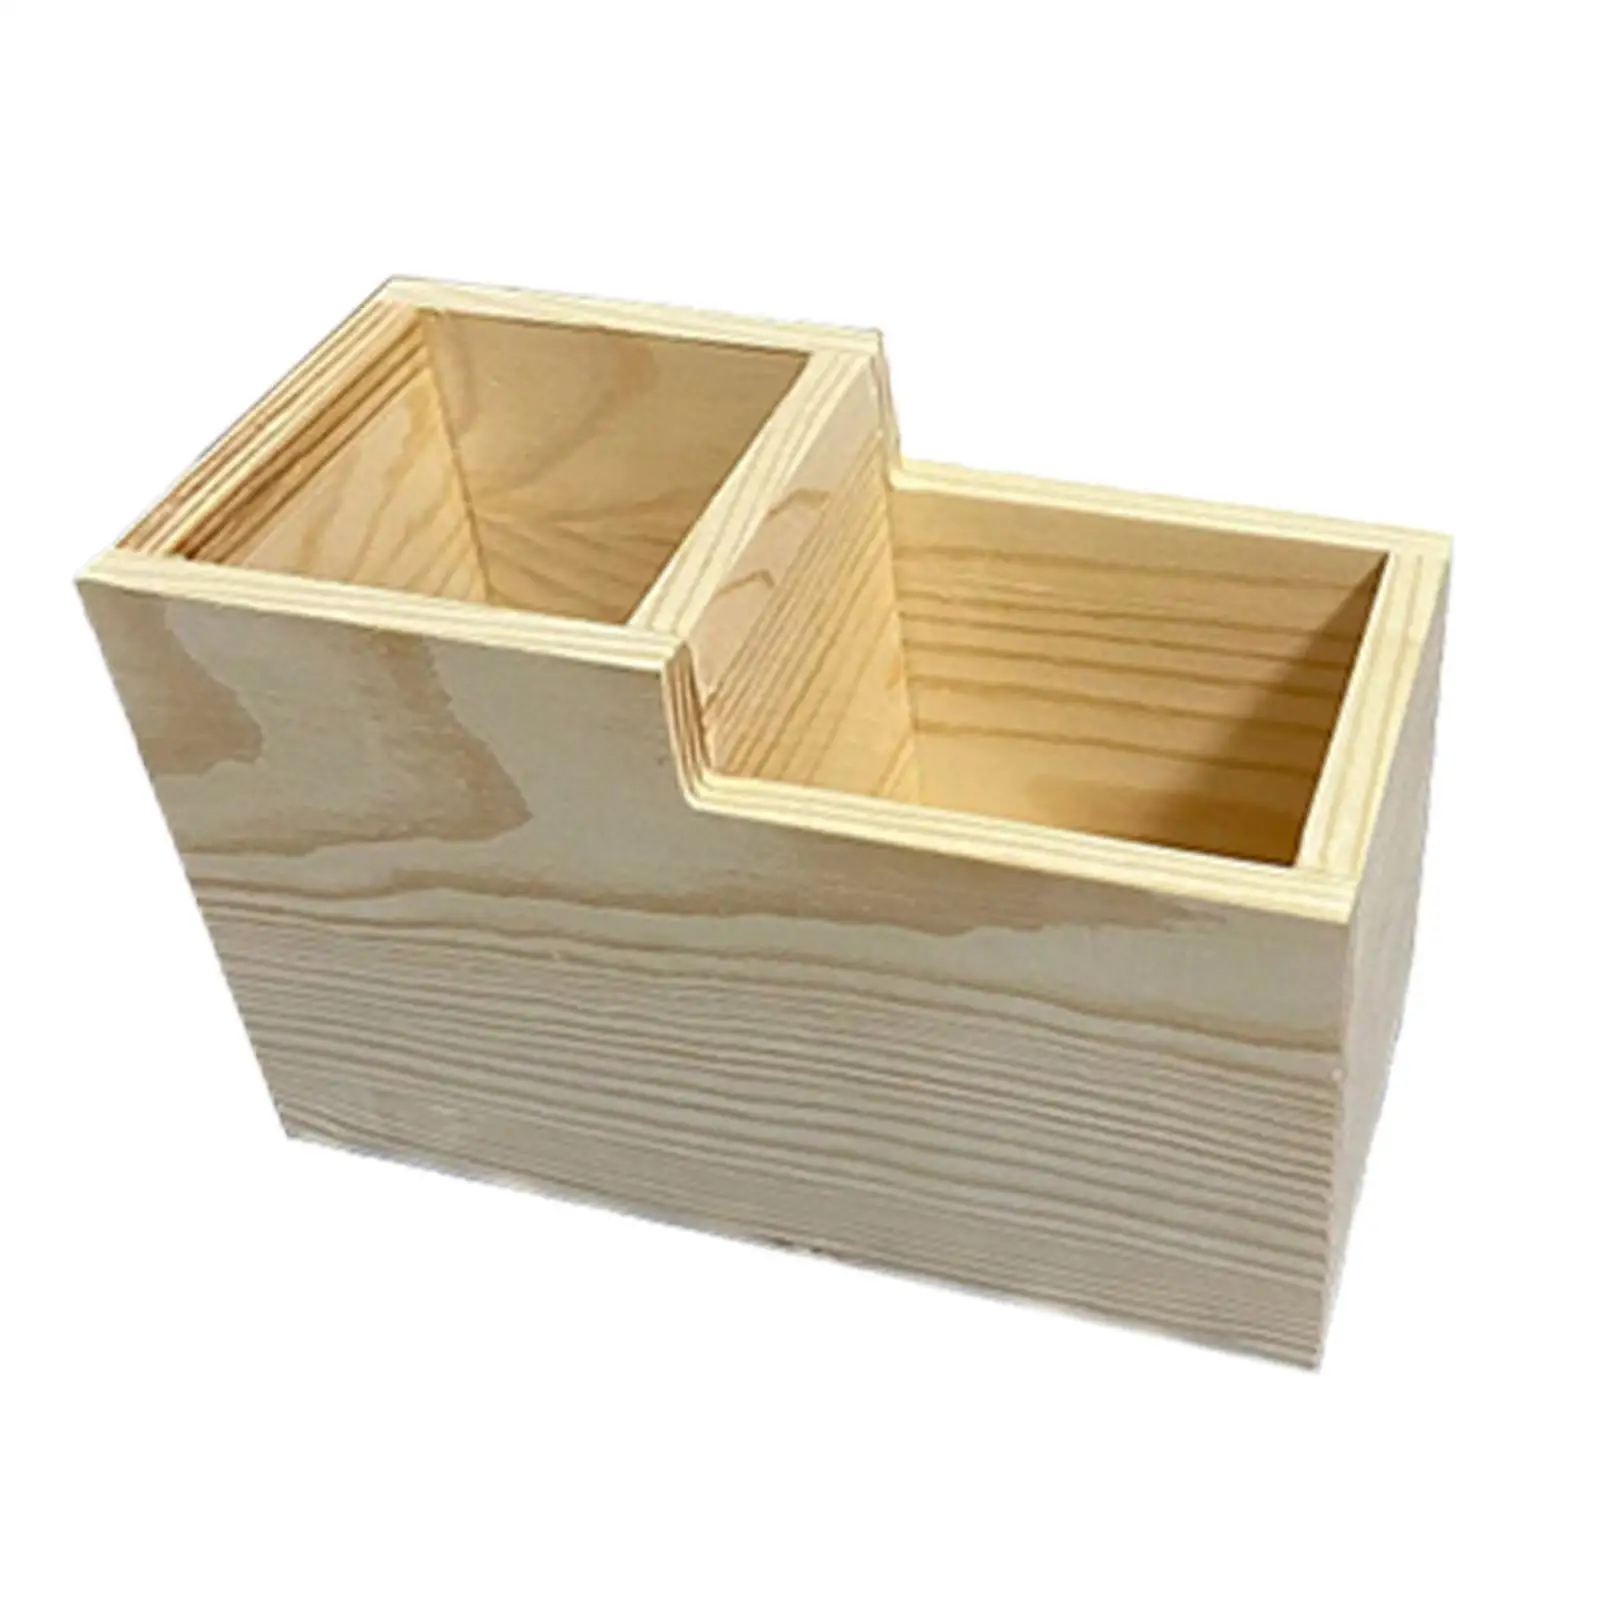 Wooden Makeup Organizer Stylish Practical Bracelet Organizer Durable Home for Bedroom Drawer Nail Salon Countertop Sundries